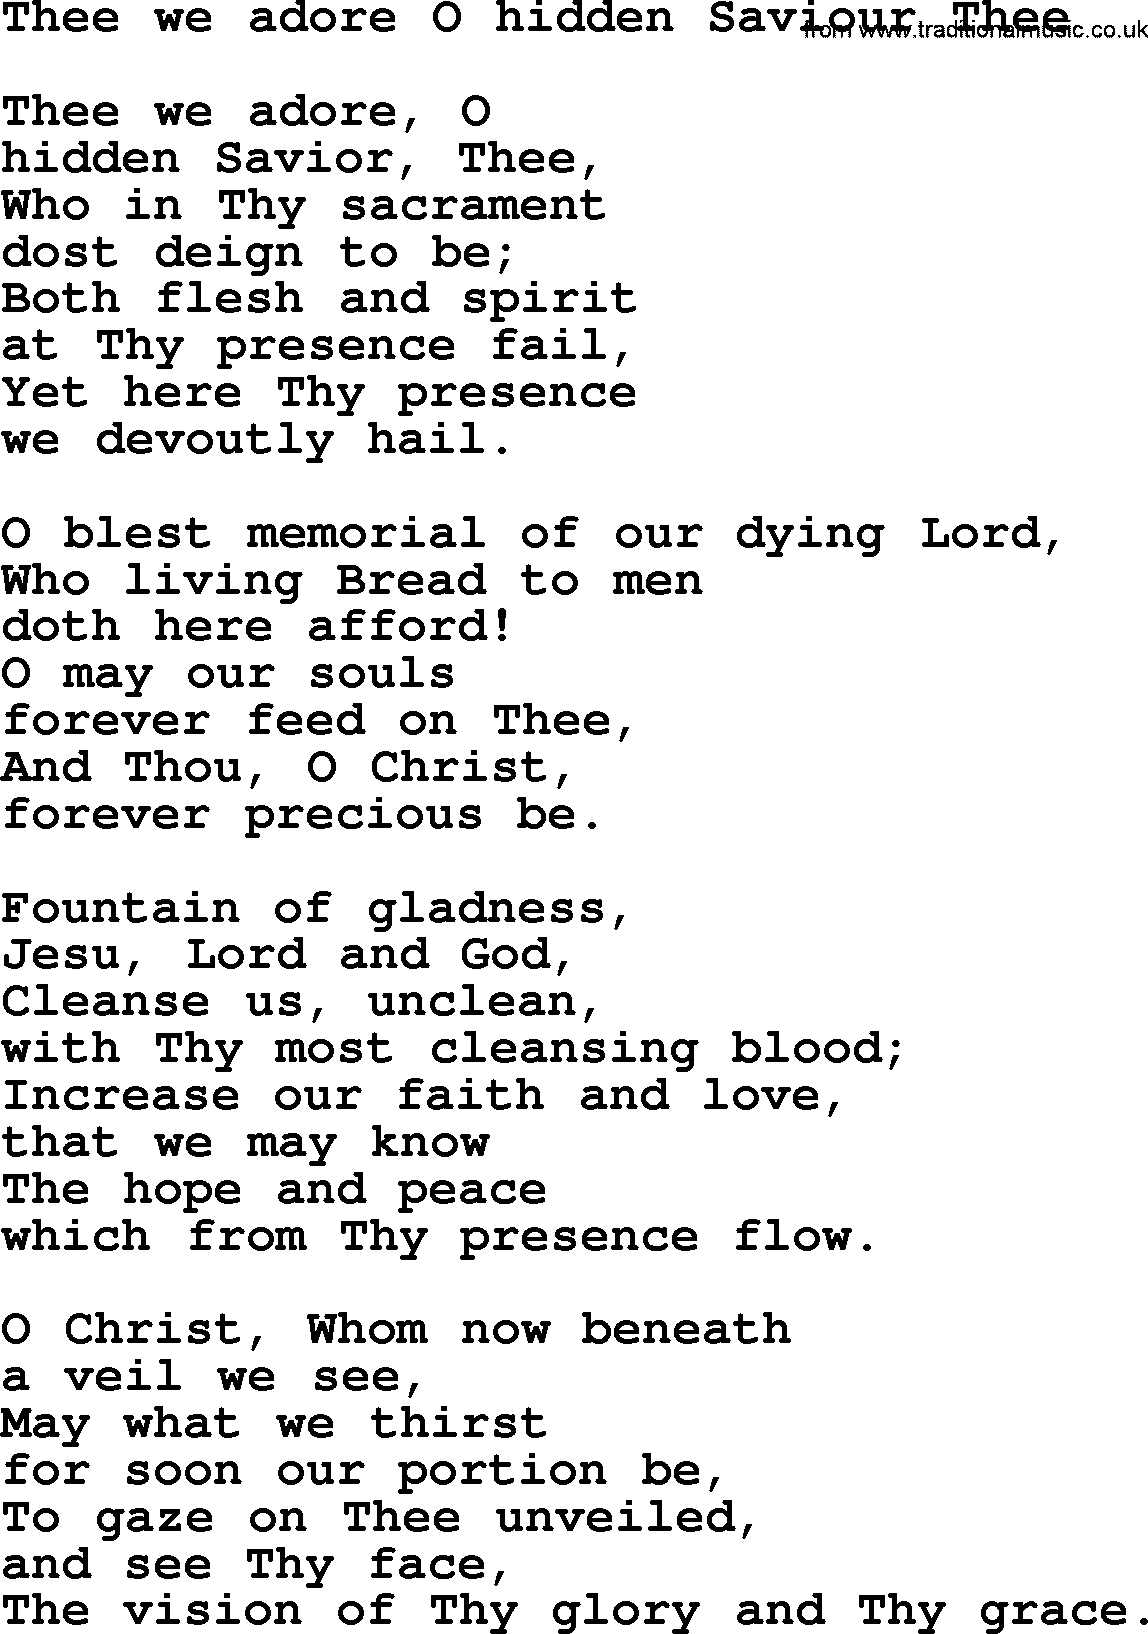 Baptism and Christening Hymns and Songs, Hymn: Thee We Adore O Hidden Saviour Thee, lyrics and PDF